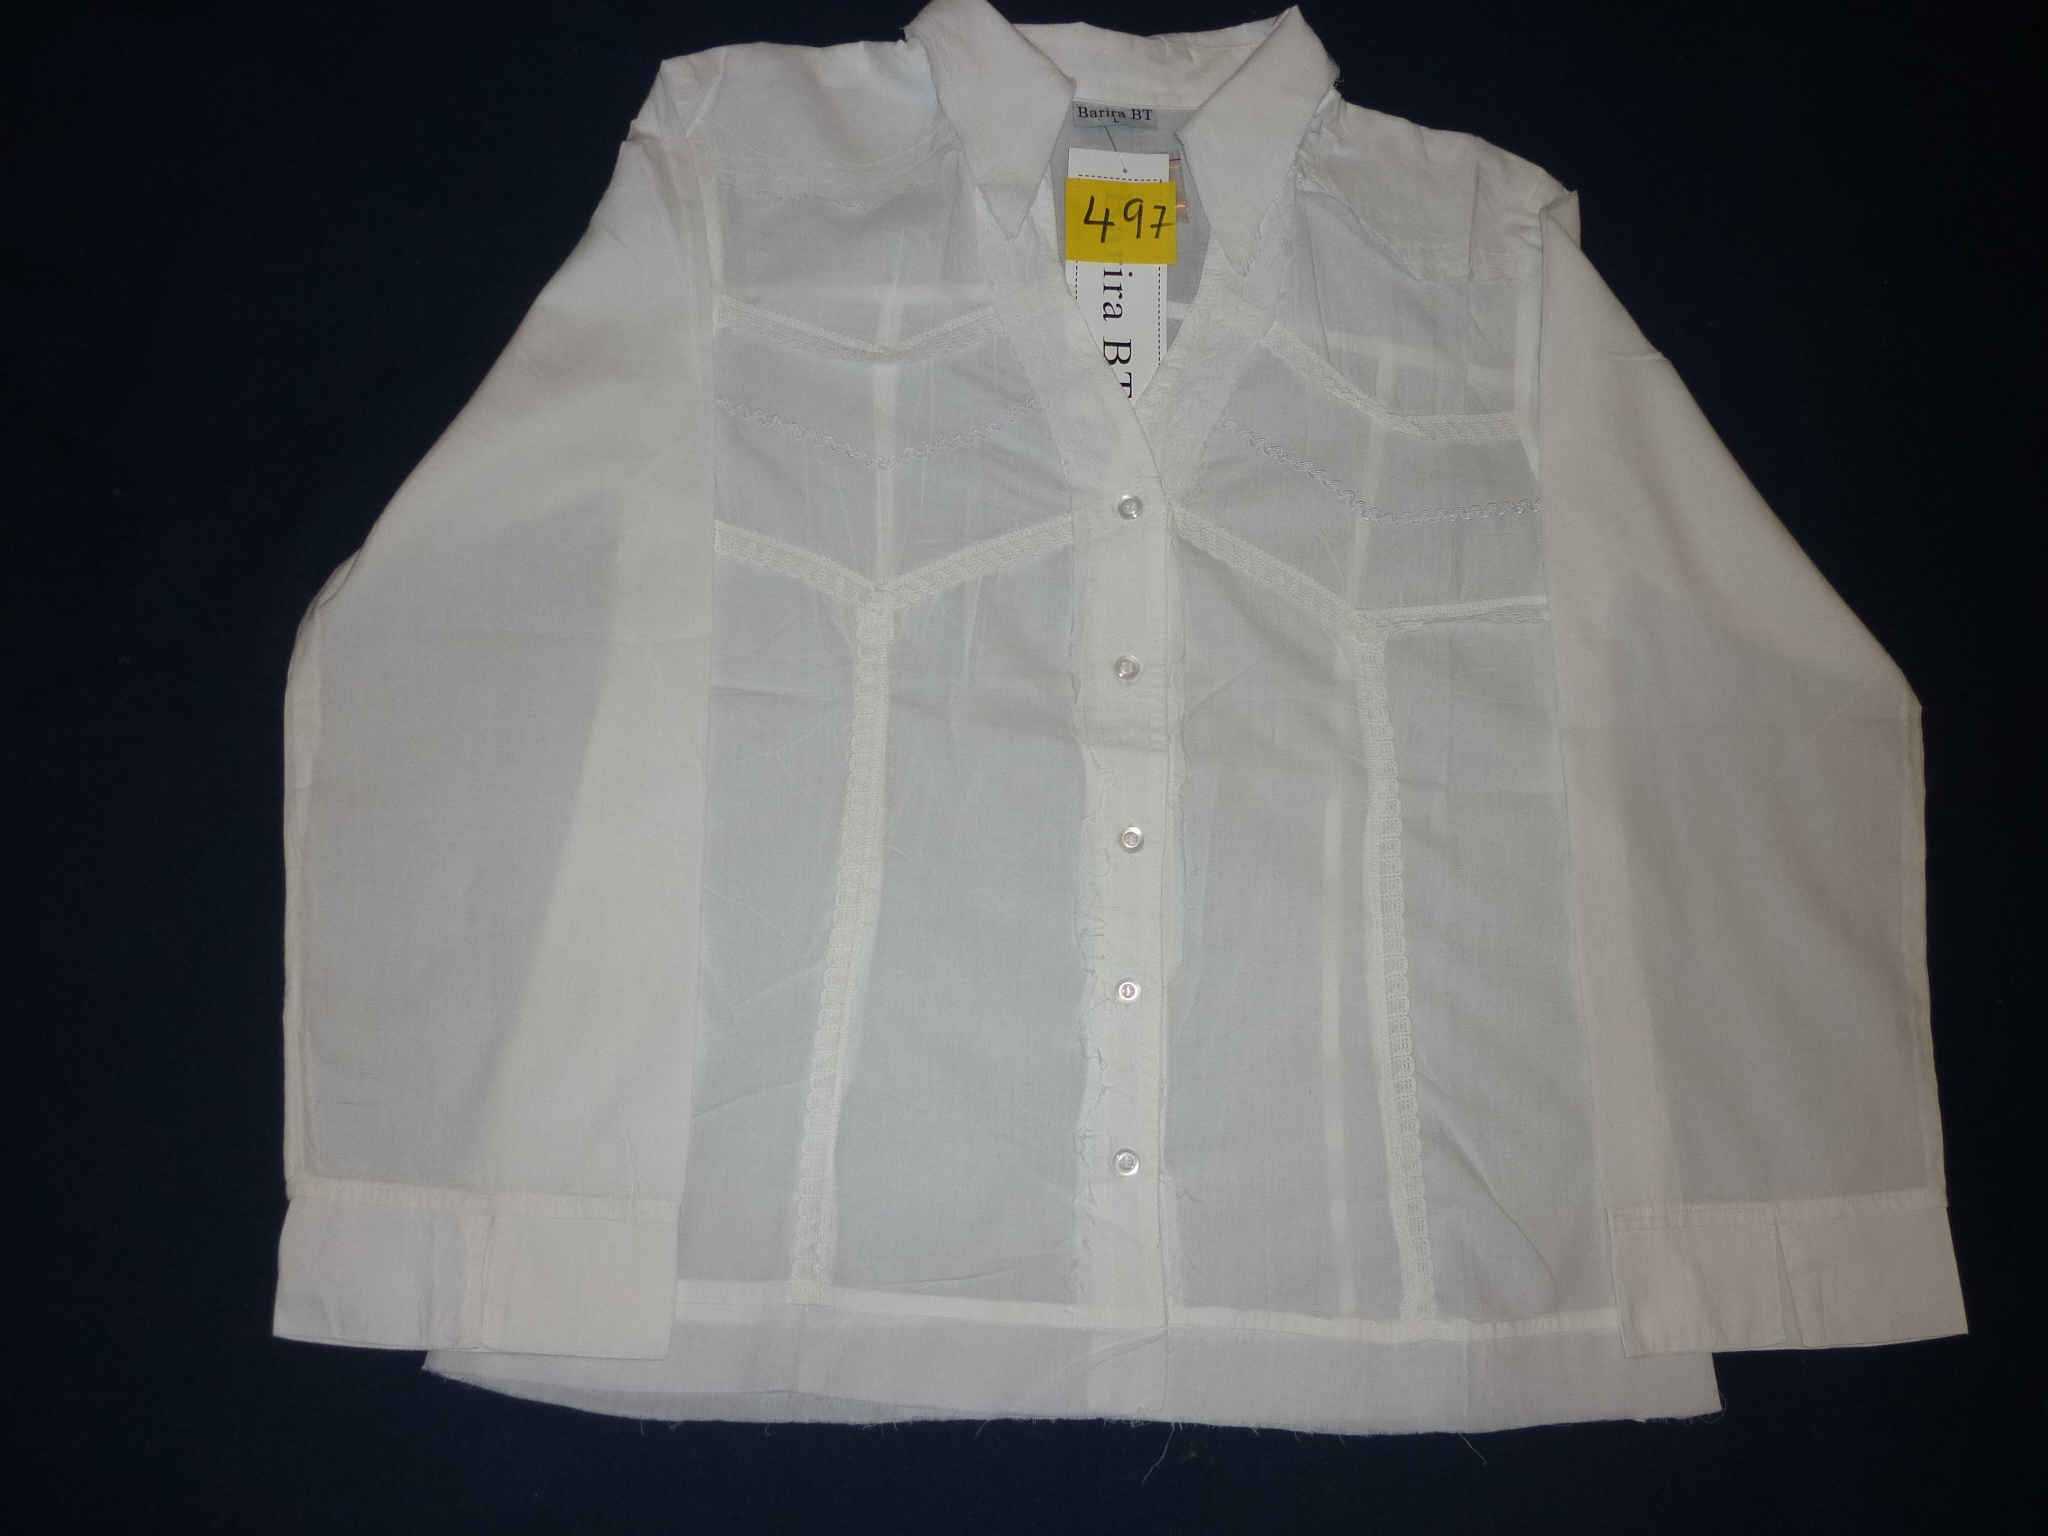 INDIAN BLOUSE IN EXCLUSIVE DESIGN,100% COTTON FOR WEARING IN CHRISTMAS AND PARTIES . WHITE, STYLISH TYPE V COLLAR , STYLISH EMBROIDERY ,HAVING 5 BUTTONS FOR FRONT OPENING AND LONG SLEEVES. NO BUTTONS AT THE CUFFS.WE ALSO GUARANTEE THAT YOU CAN NOT FIND AN